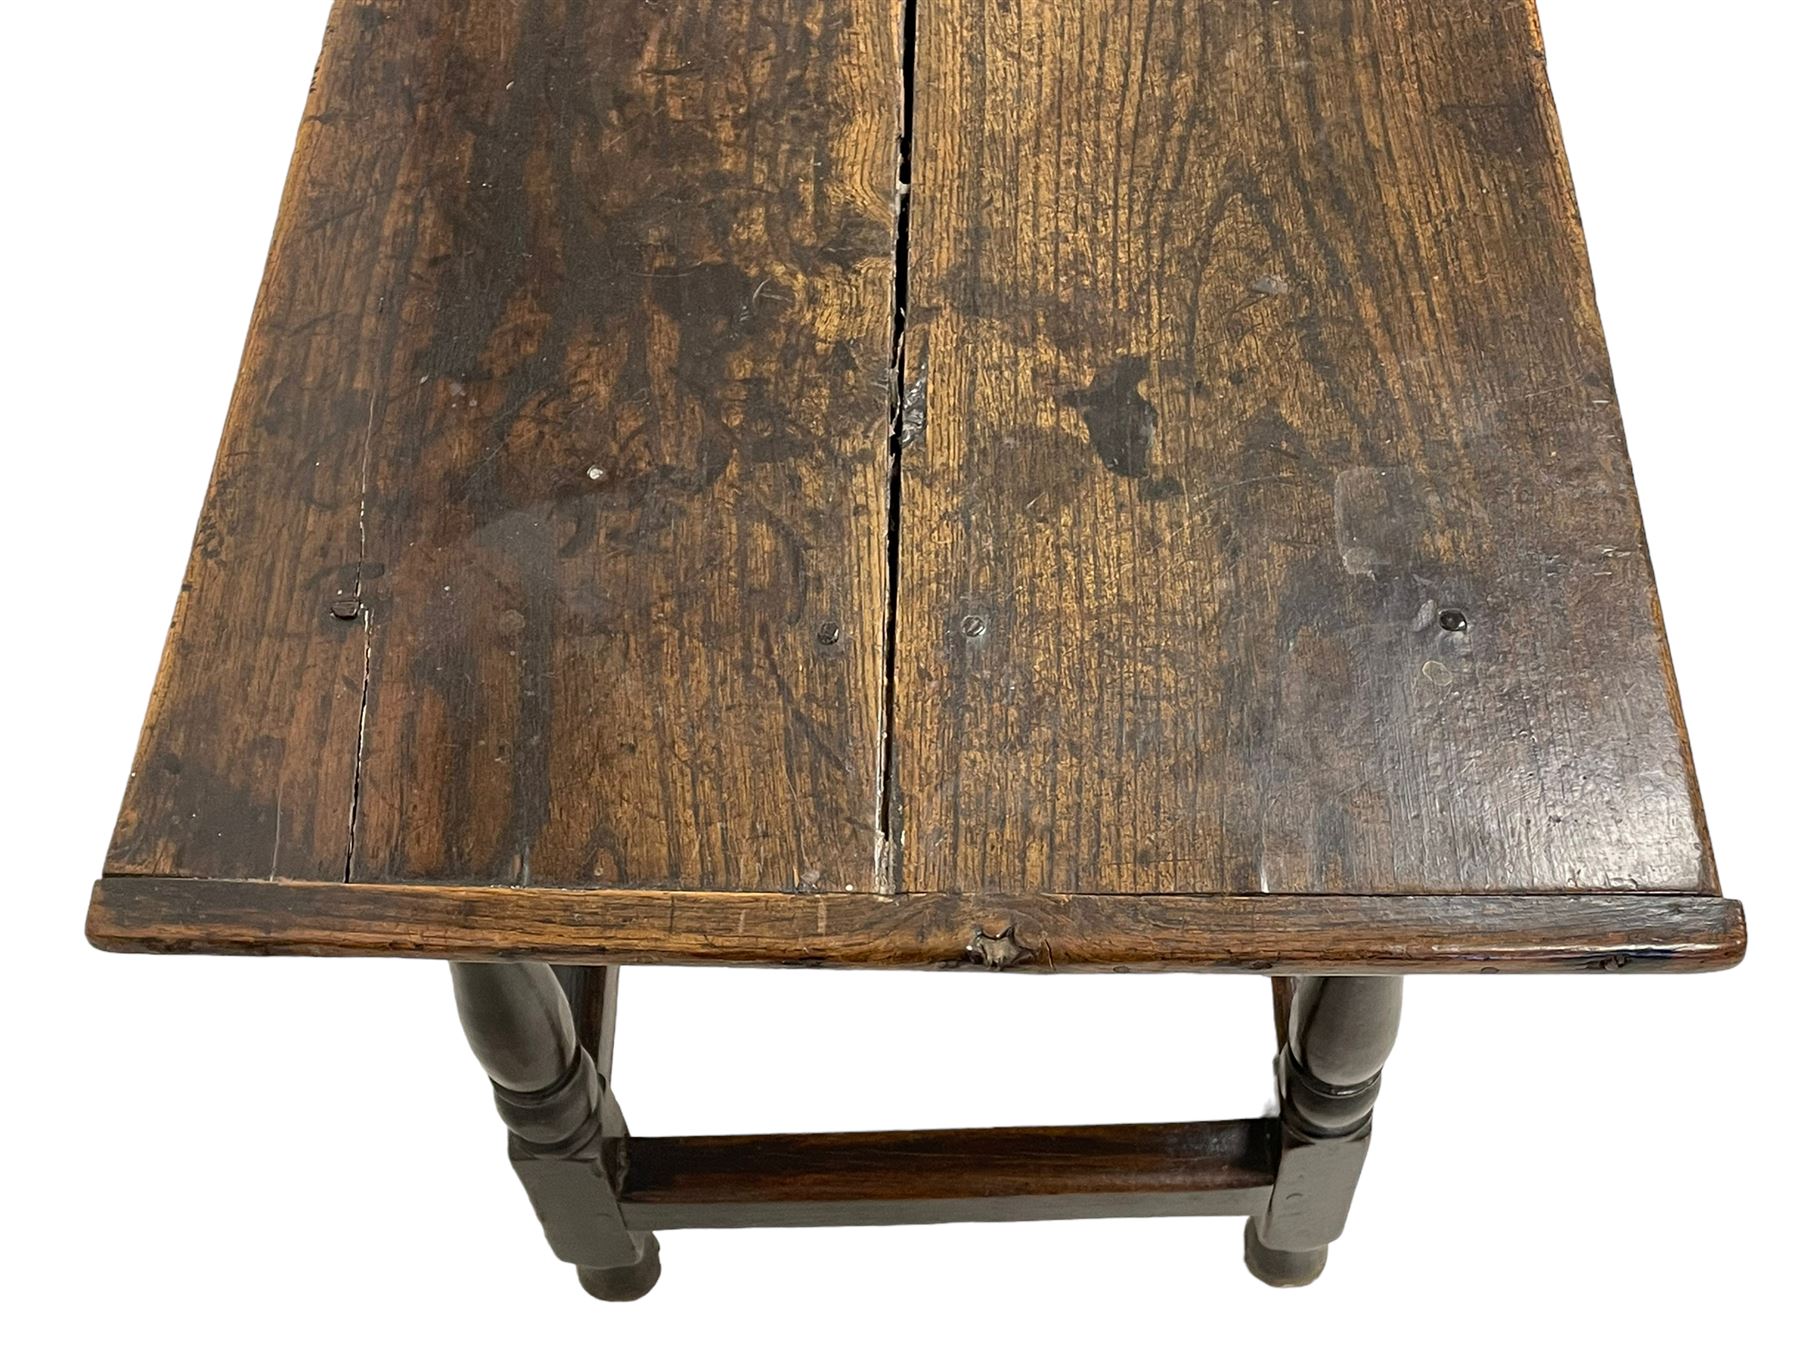 18th century oak side table - Image 4 of 7